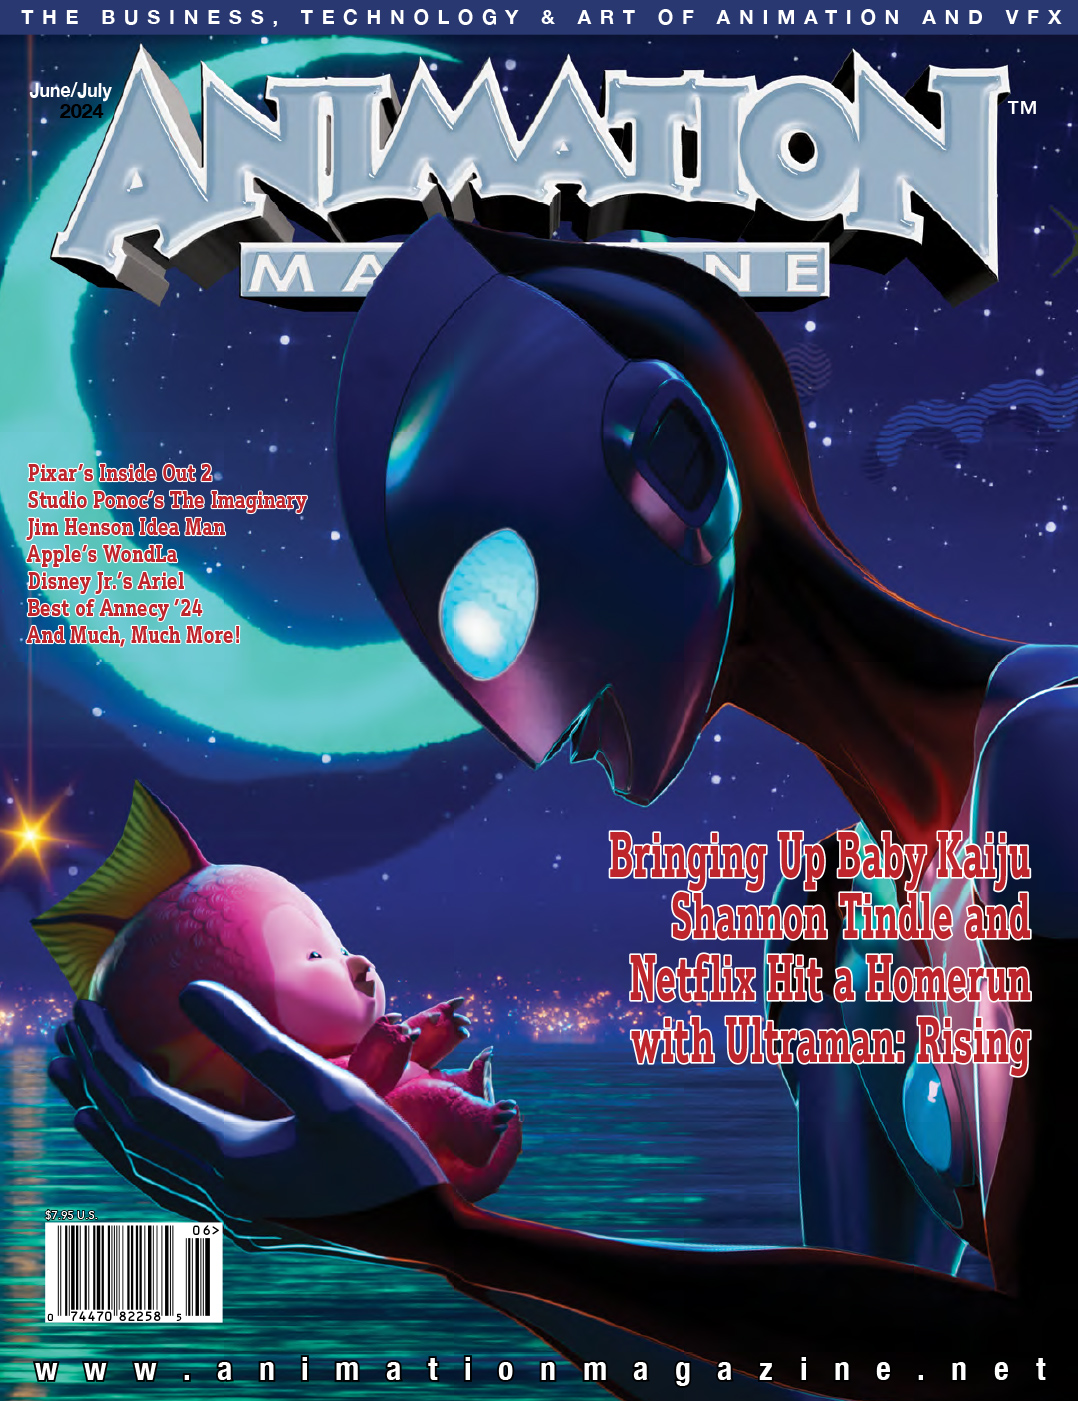 Animation Magazine  The News, Business, Technology, and Art of